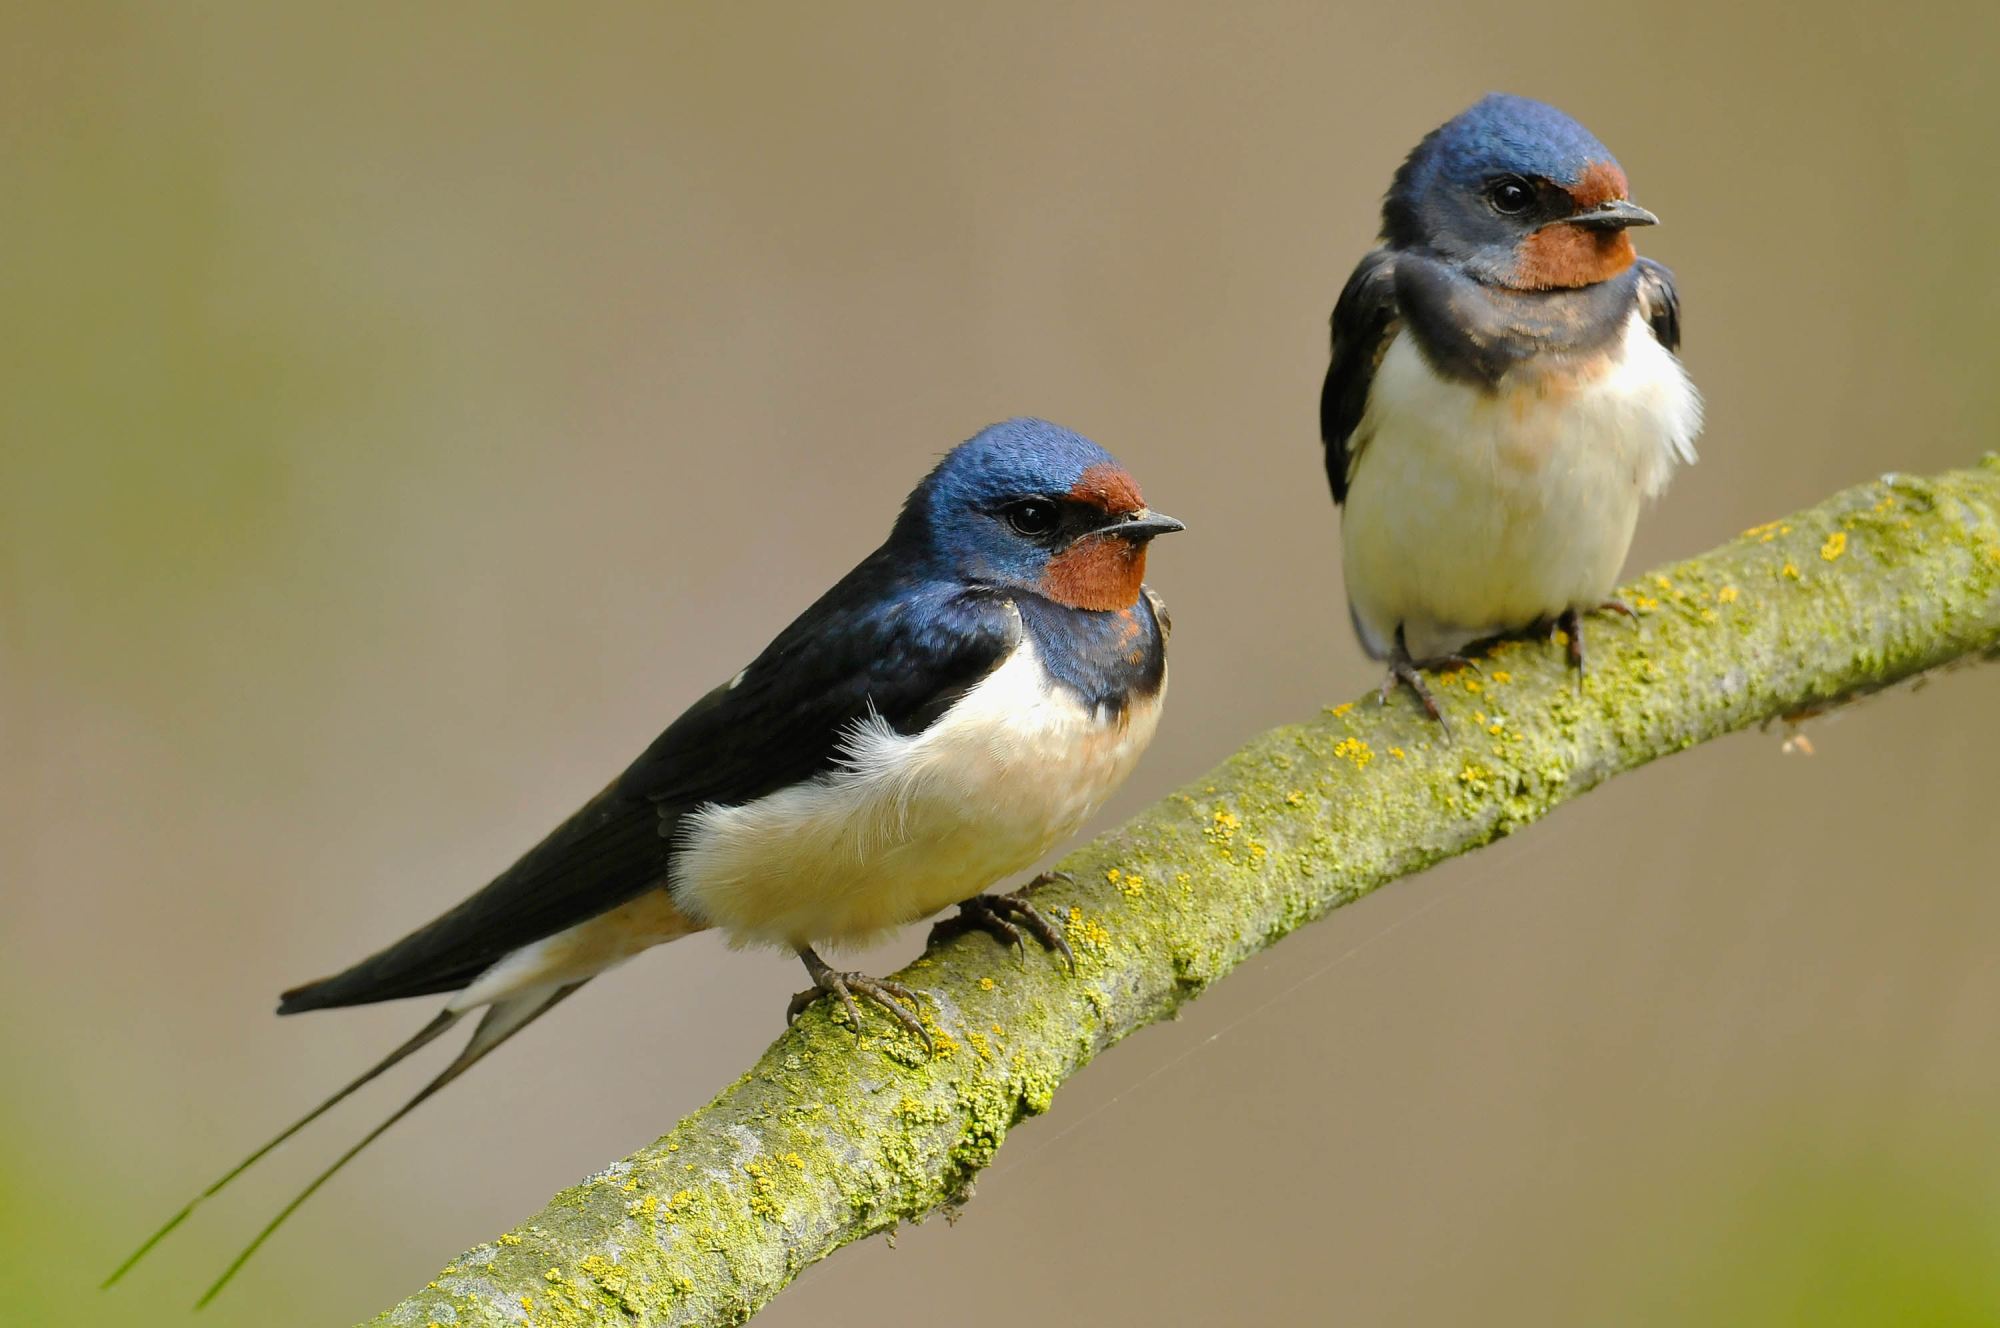 Swallow Migration Facts